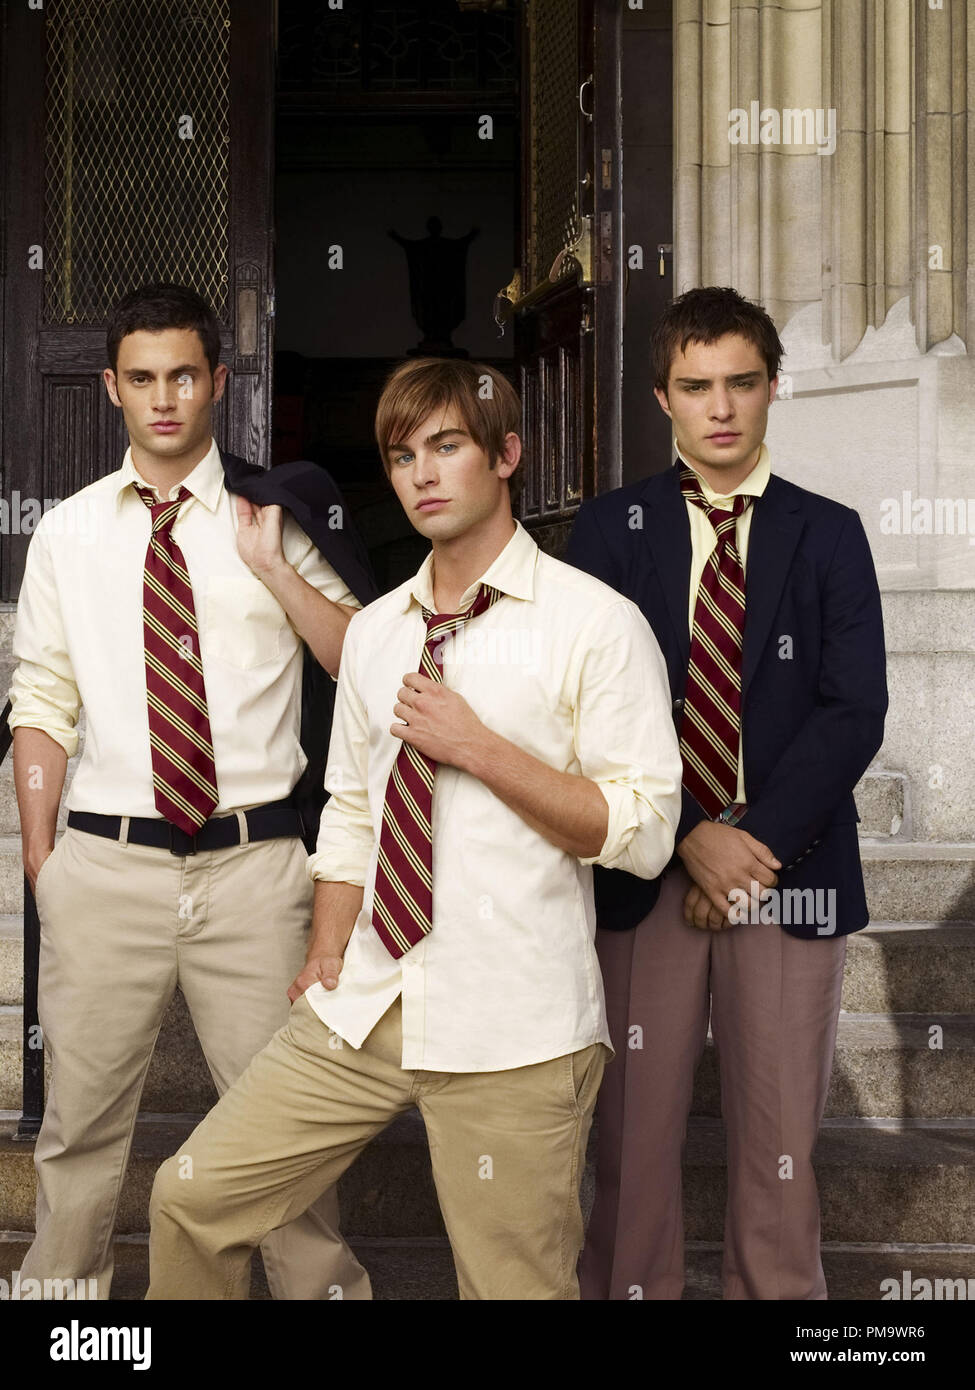 GOSSIP GIRL Pictured: Penn Badgley as Dan, Chace Crawford as Nate, Ed Westwick as Chuck Photo Credit: The CW/Andrew Eccles ©2007 The CW Network, LLC.  All rights reserved. Stock Photo